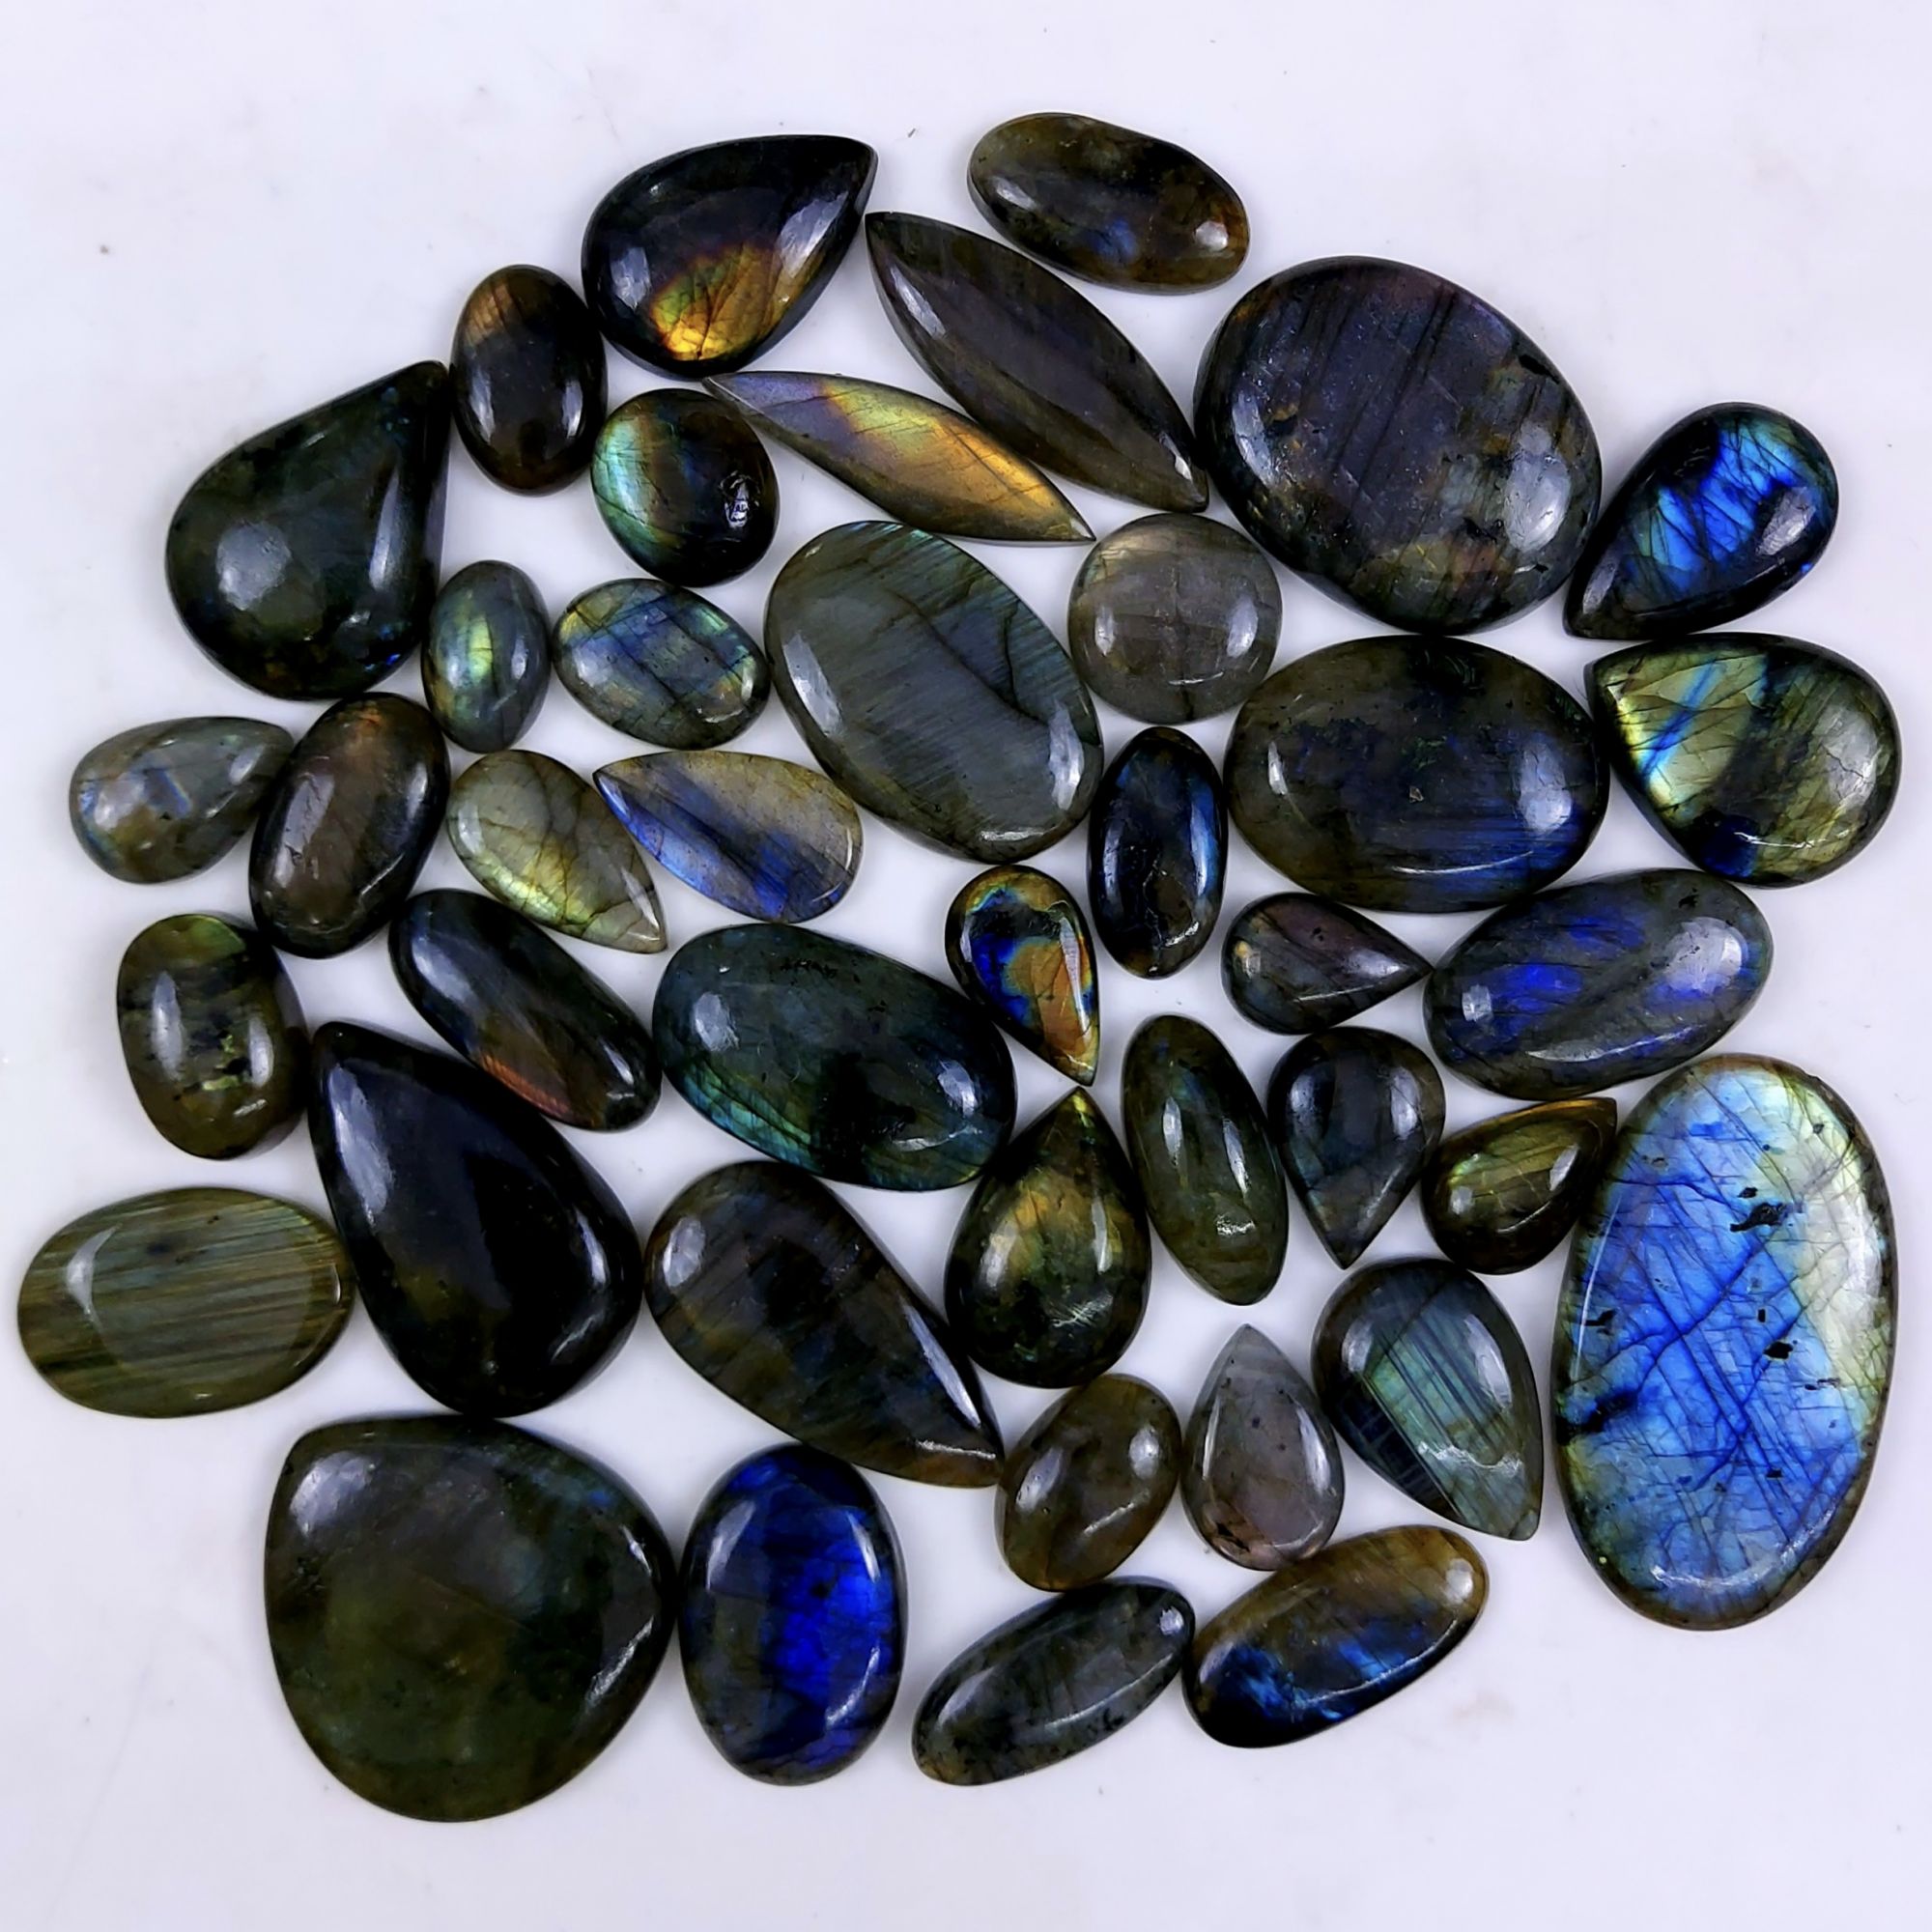 41pc 1500Cts Labradorite Cabochon Multifire Healing Crystal For Jewelry Supplies, Labradorite Necklace Handmade Wire Wrapped Gemstone Pendant 55x32 22x12mm#6391